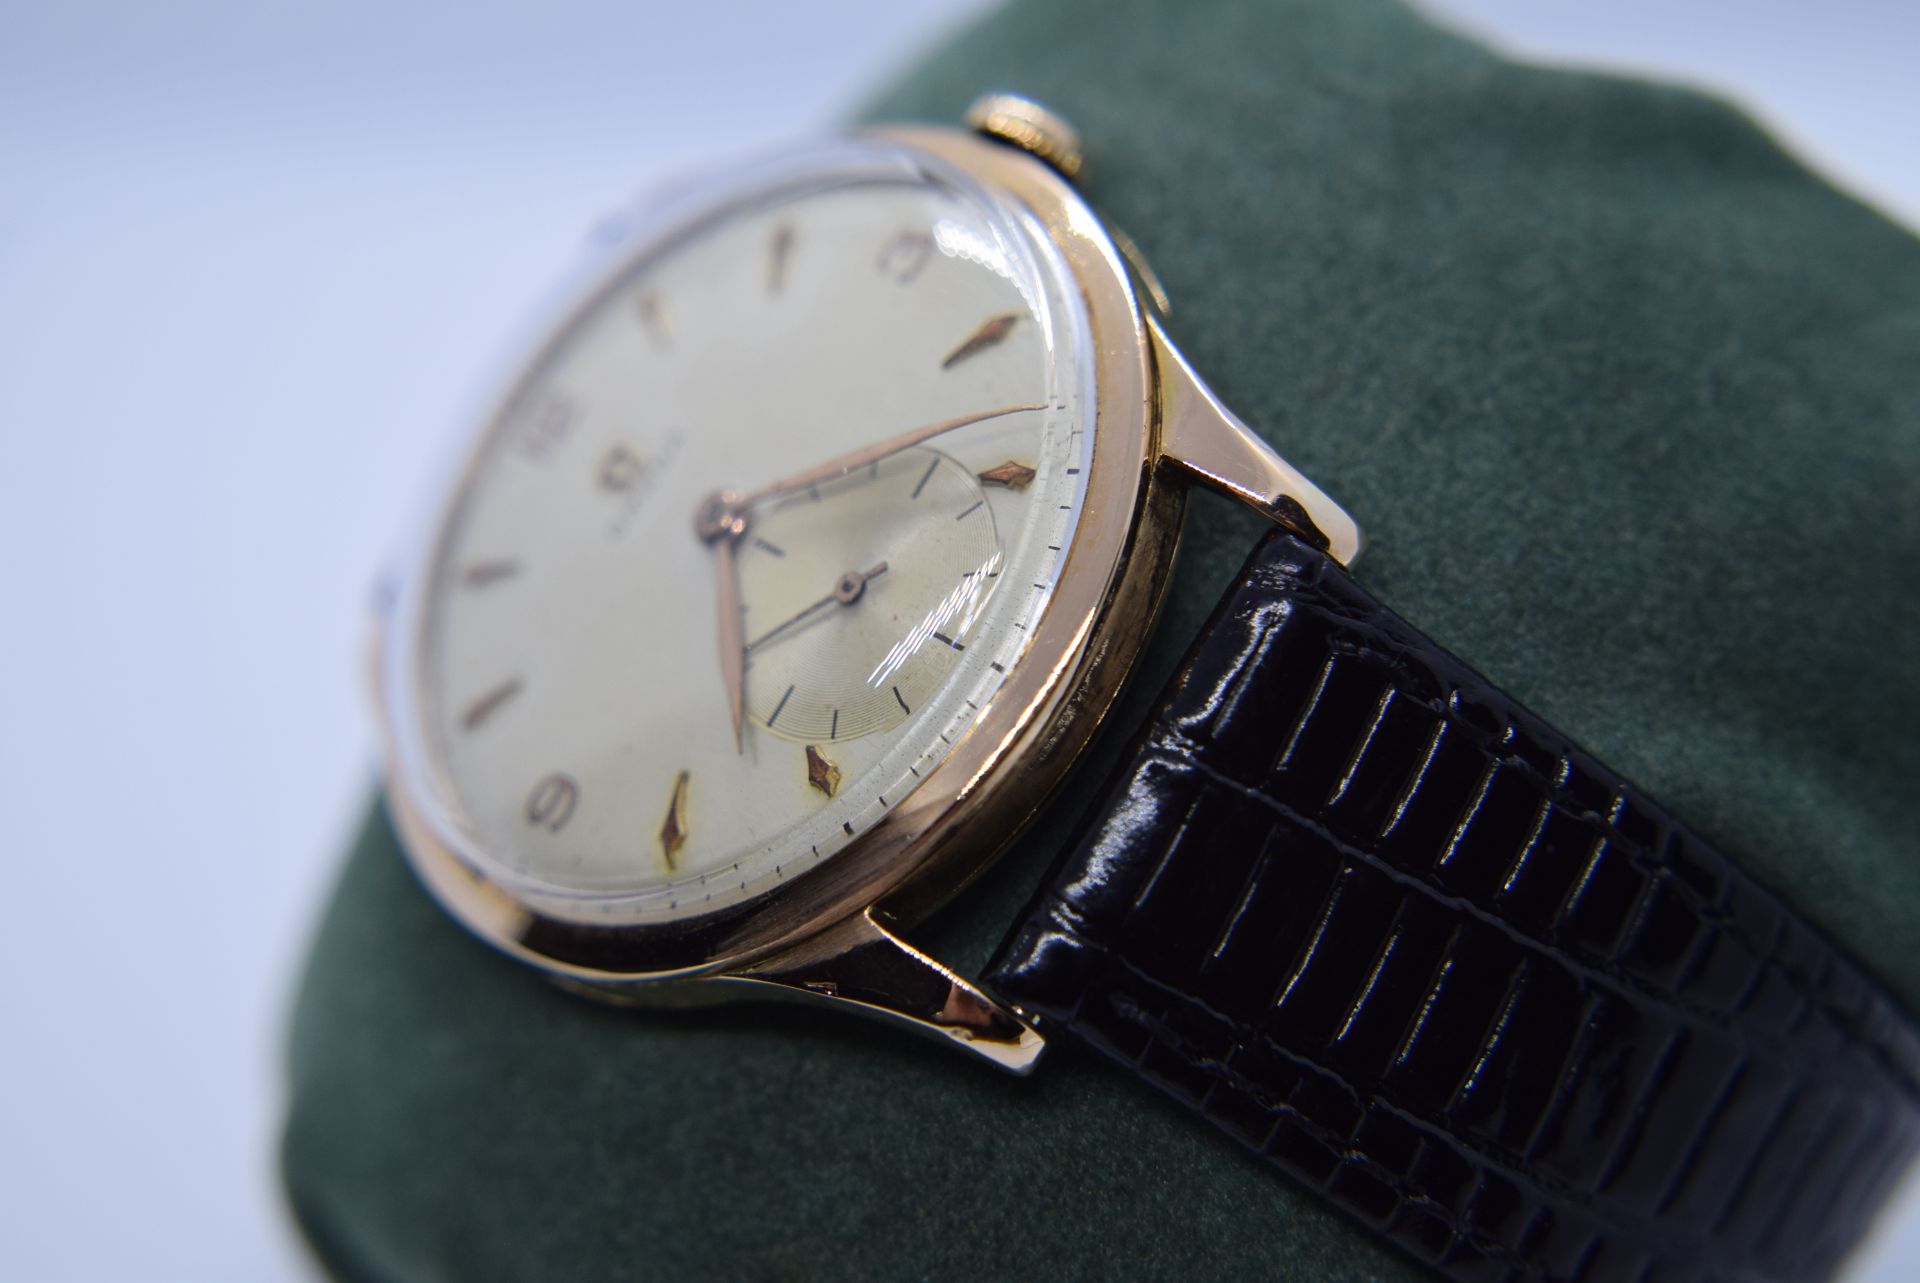 OMEGA GENEVE VINTAGE 18CT YELLOW GOLD WATCH (MANUAL WIND CAL. 265 OMEGA MOVEMENT) 37MM CASE - Image 7 of 7